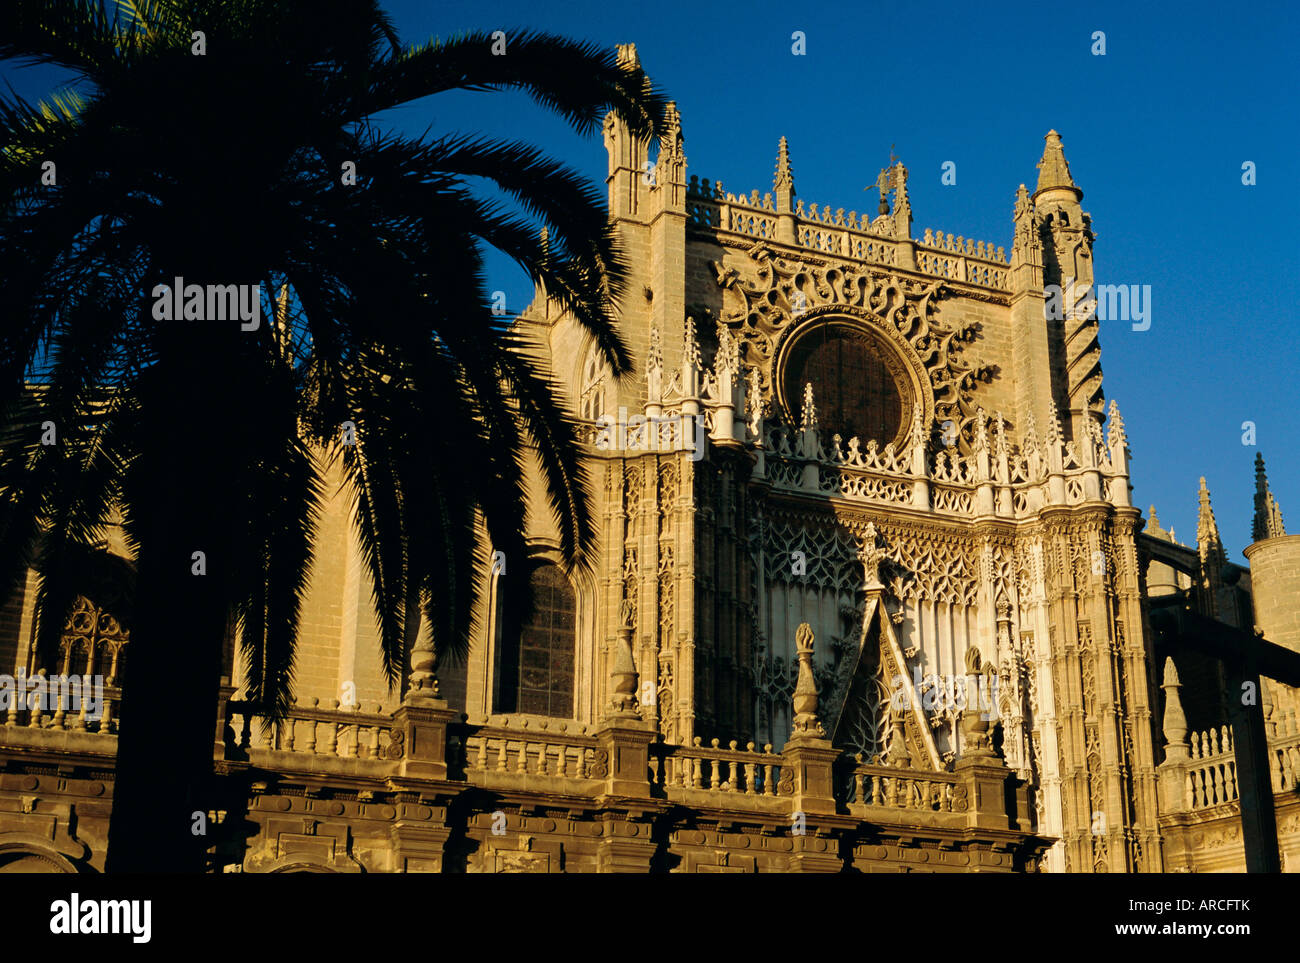 The south puerto (portal) of the Cathedral (1402-1506), Seville (Sevilla), Andalucia (Andalusia), Spain, Europe Stock Photo